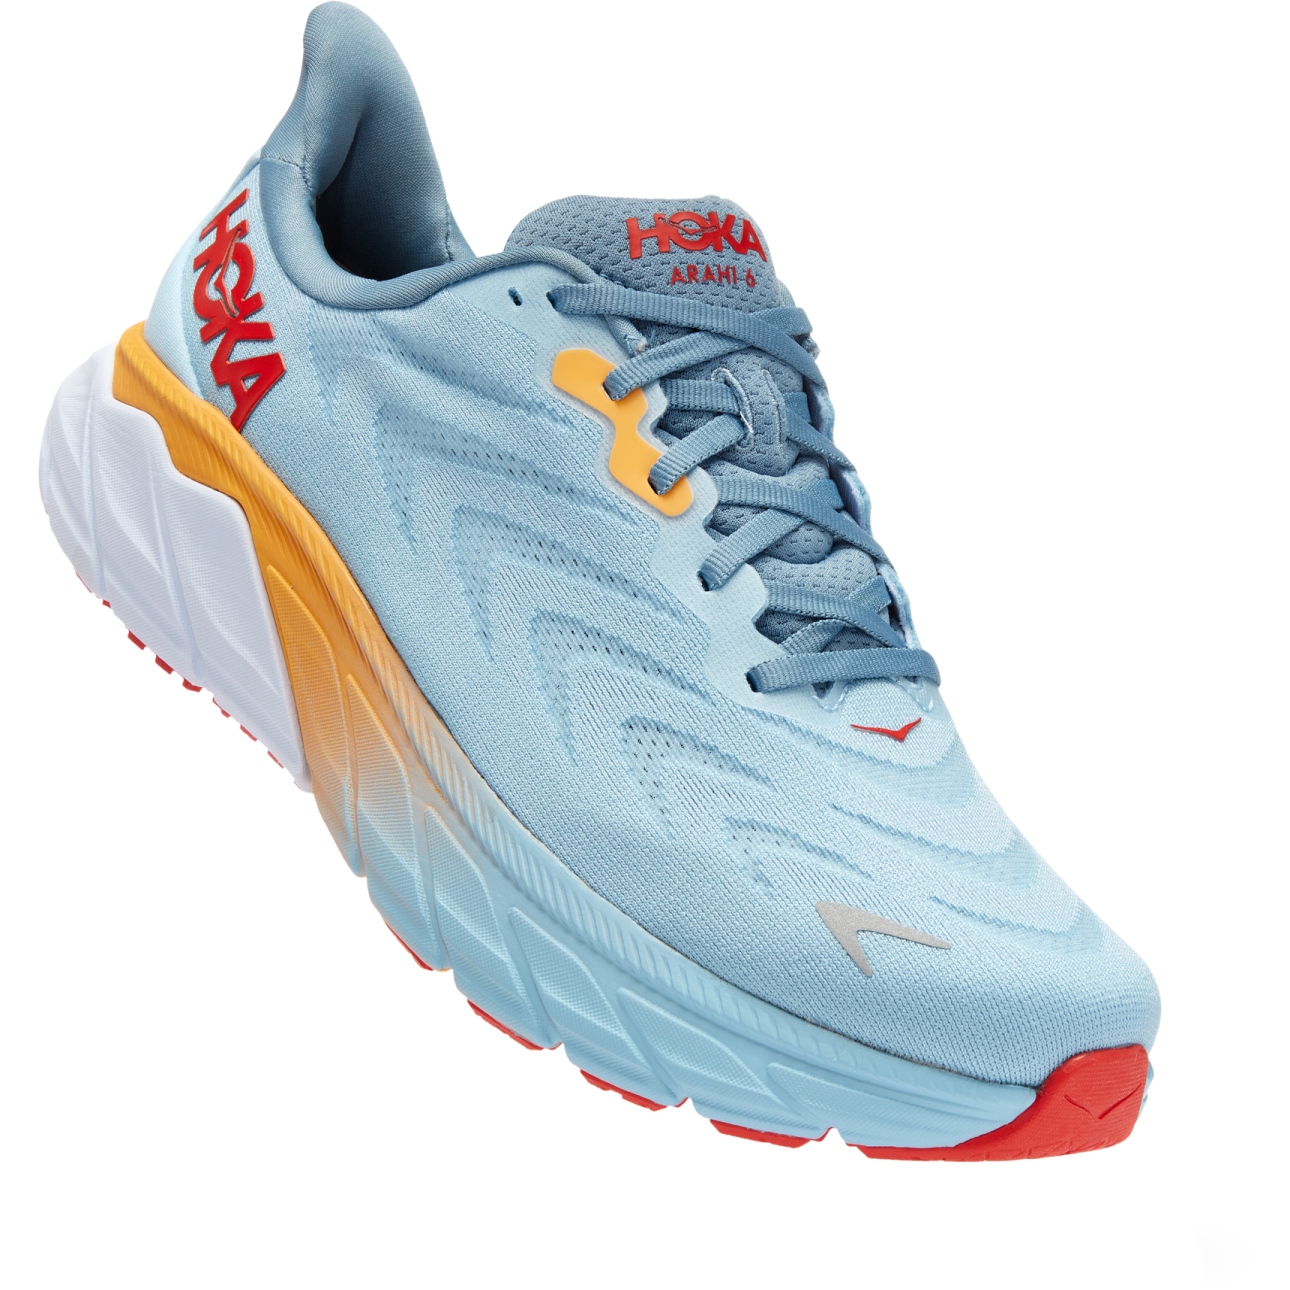 Picture of Hoka Arahi 6 Running Shoes - summer song / mountain spring